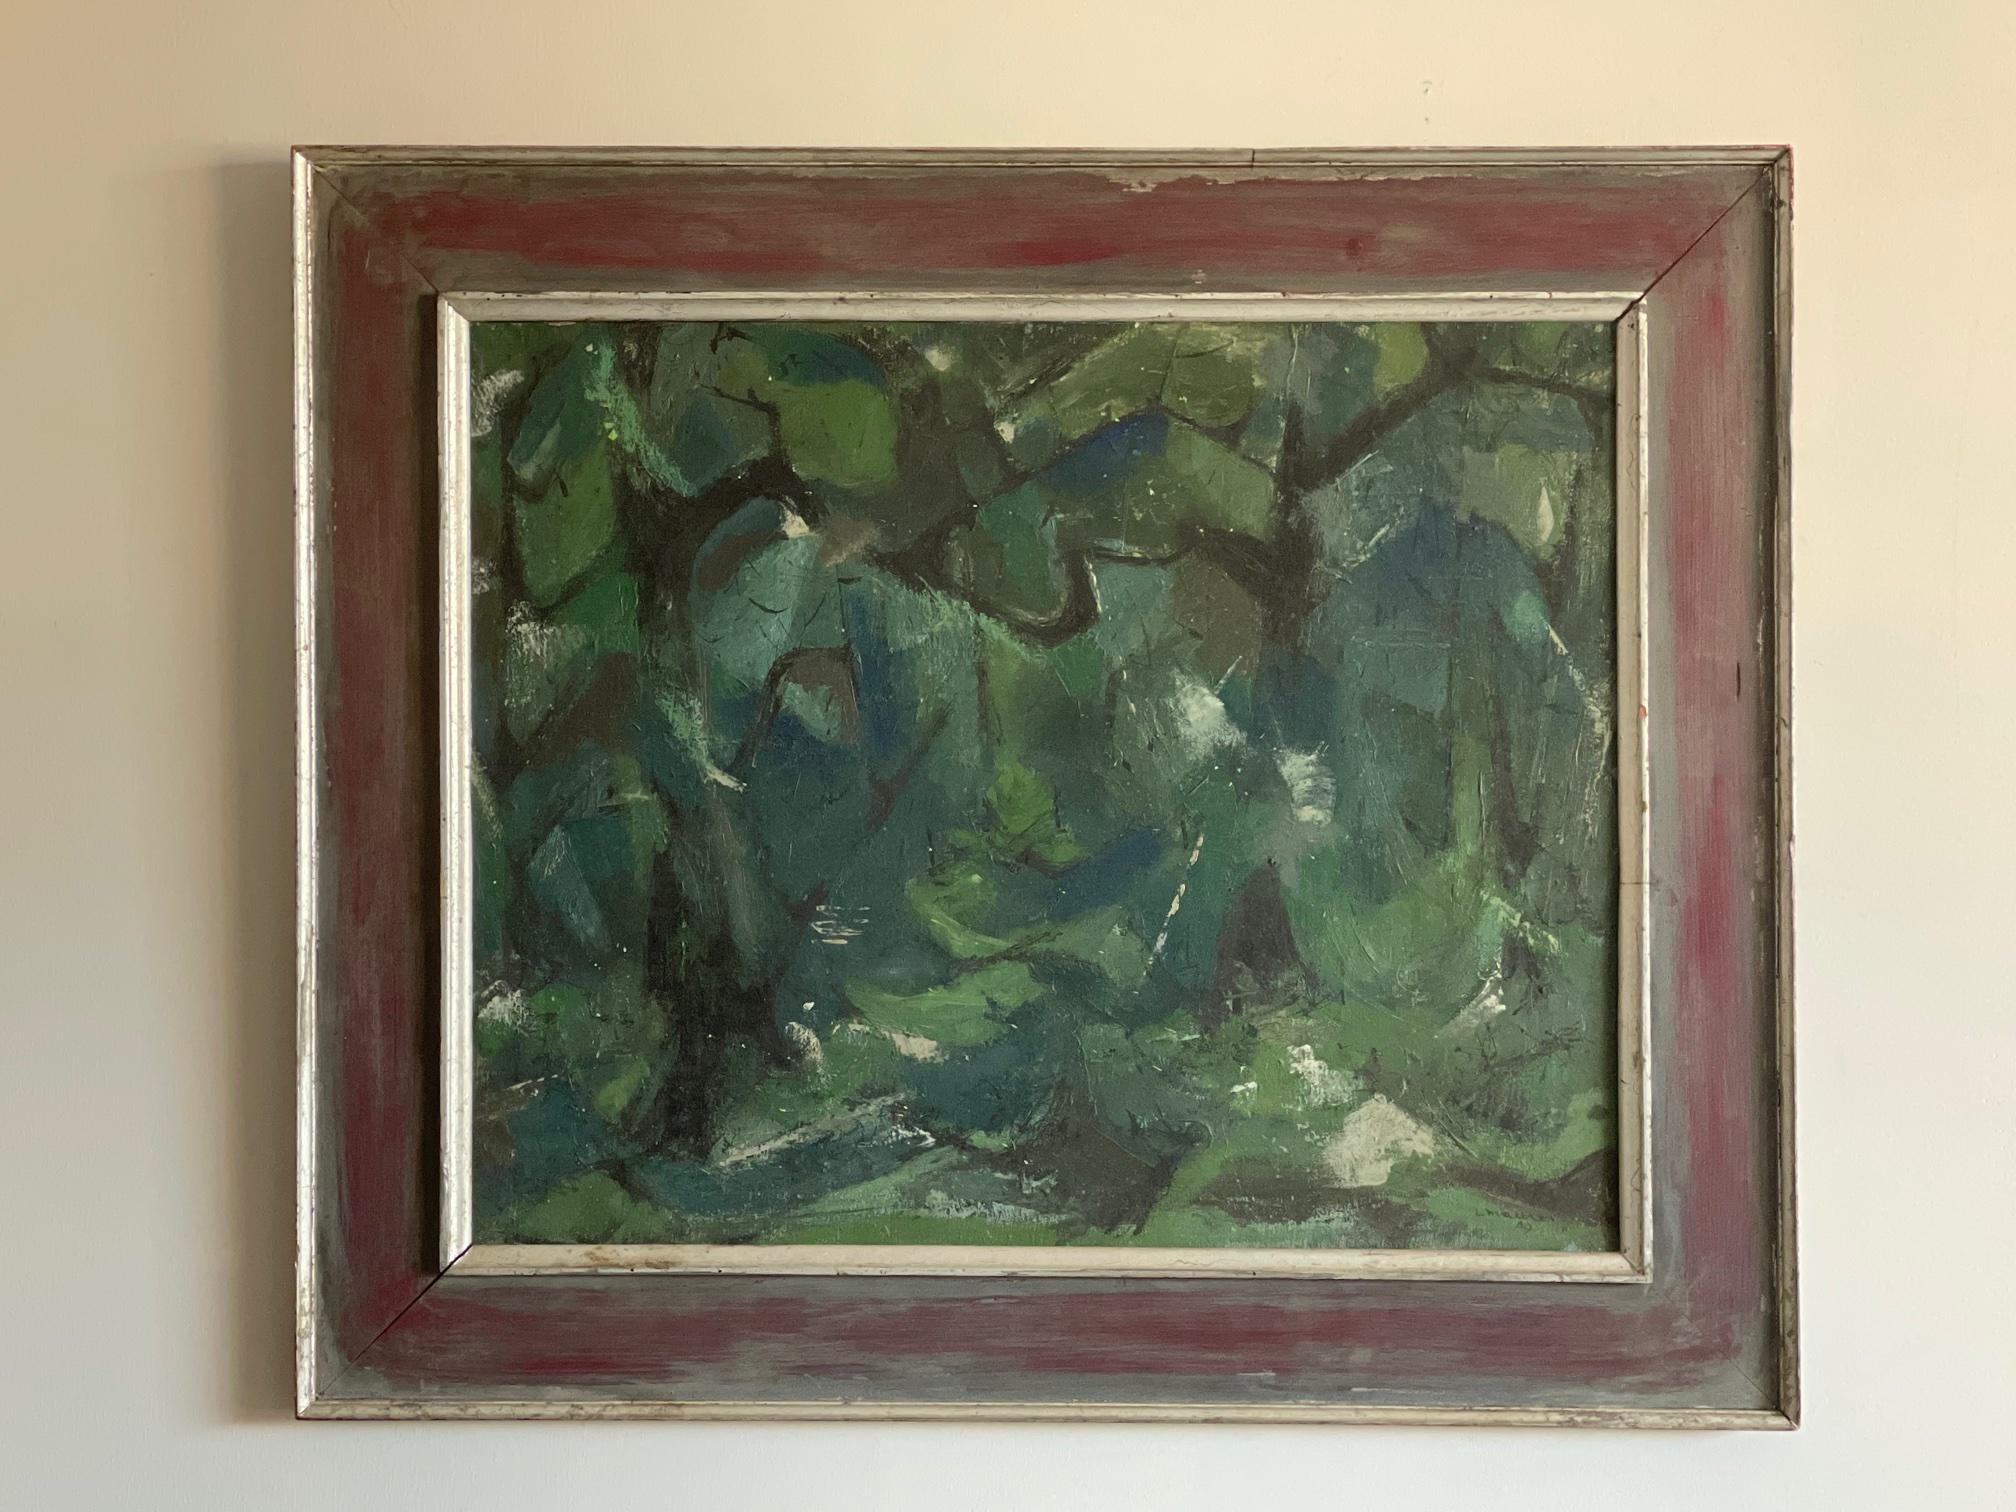 An elegant and fine abstract painting by Leonard Maurer, signed and dated 1949, titled 